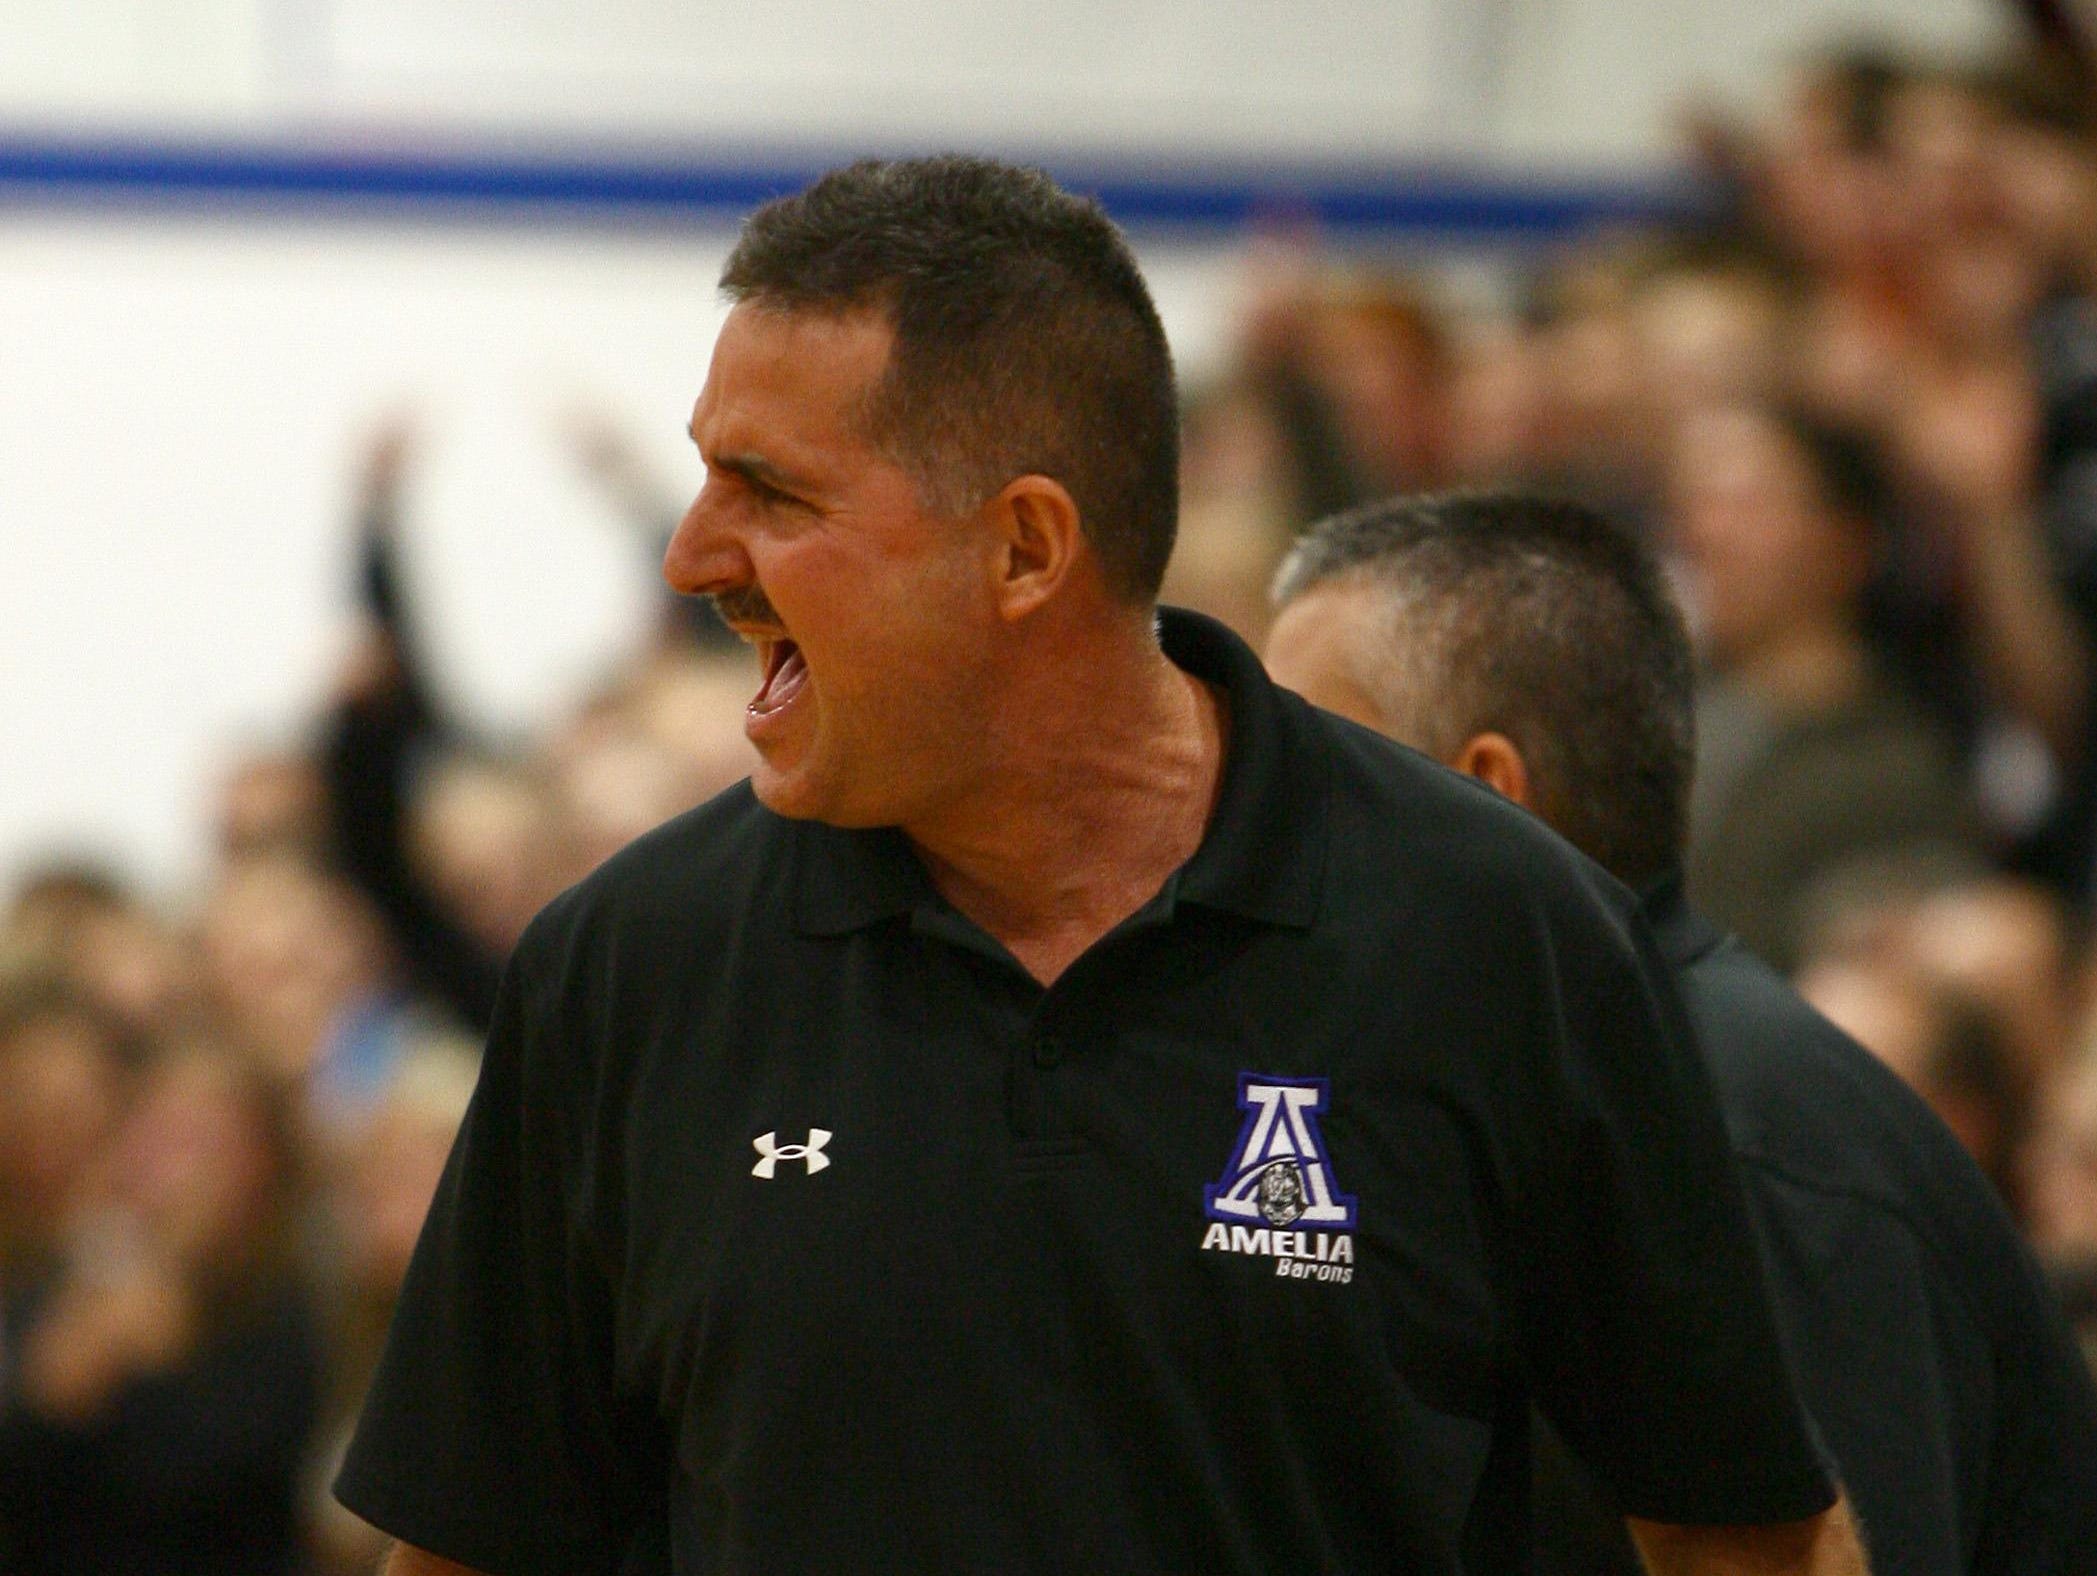 Craig Mazzaro played for the Amelia Barons and has coached the boys team in recent years.